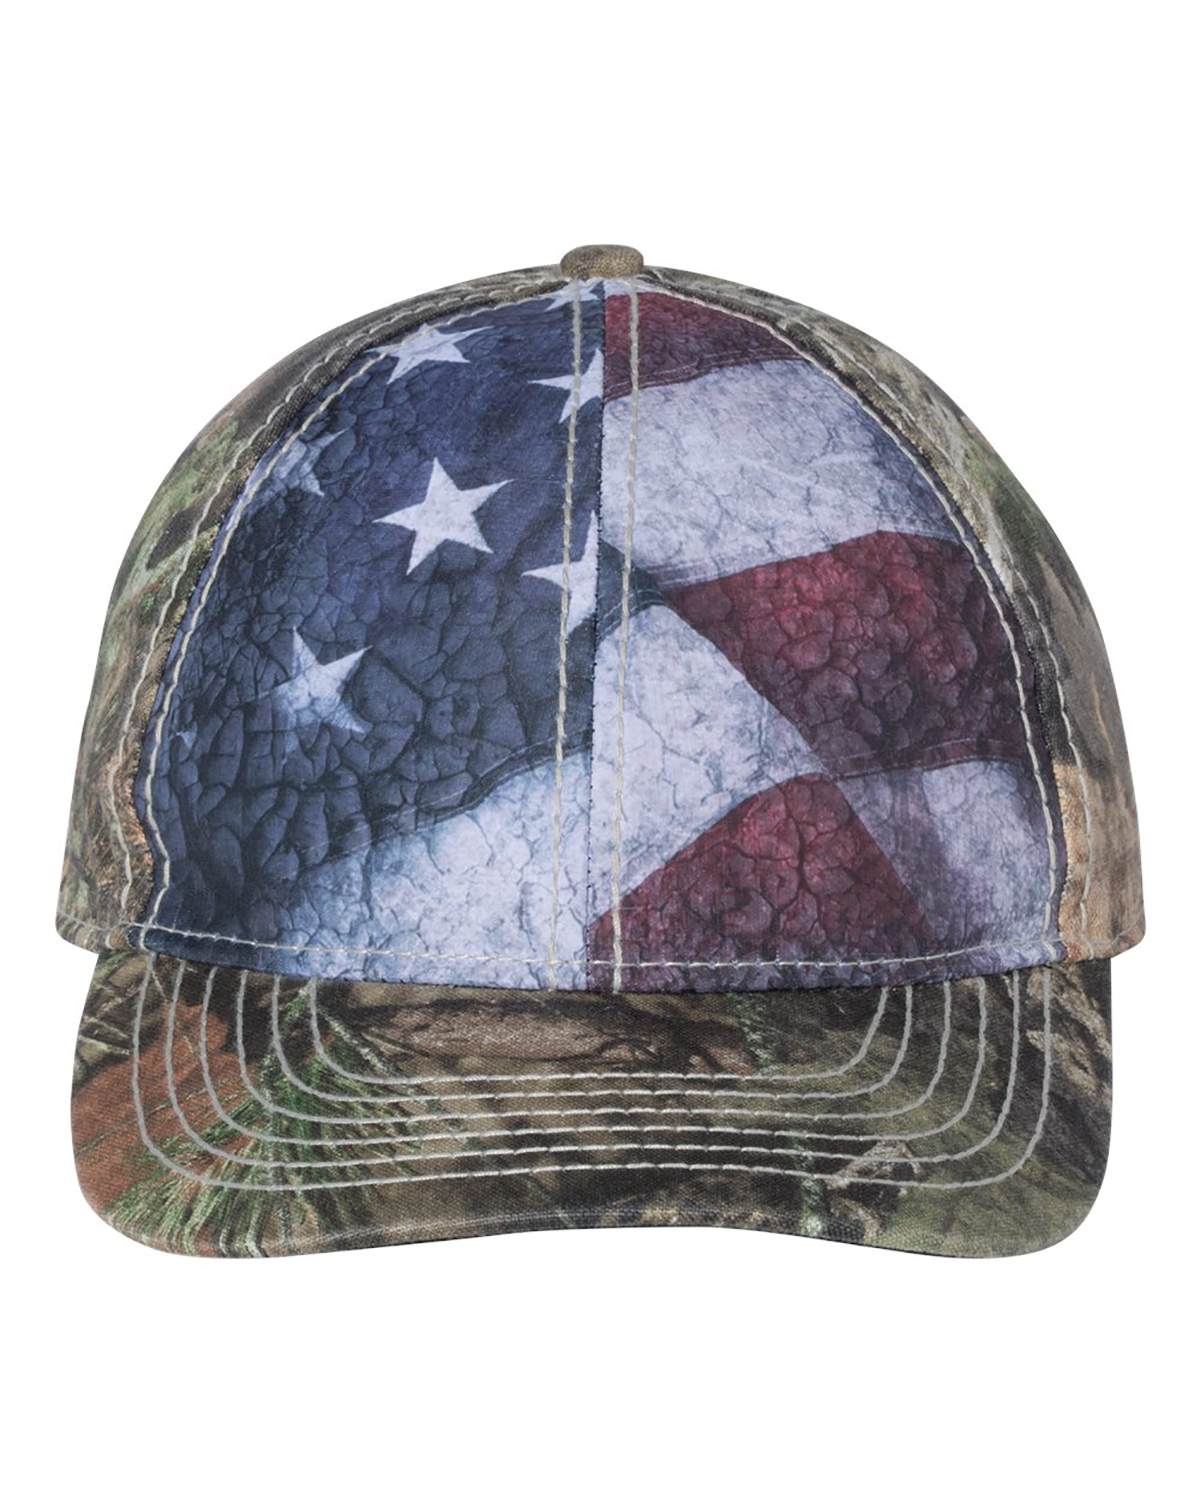 'Outdoor Cap SUS100 Camo Cap with Flag Sublimated Front Panels'